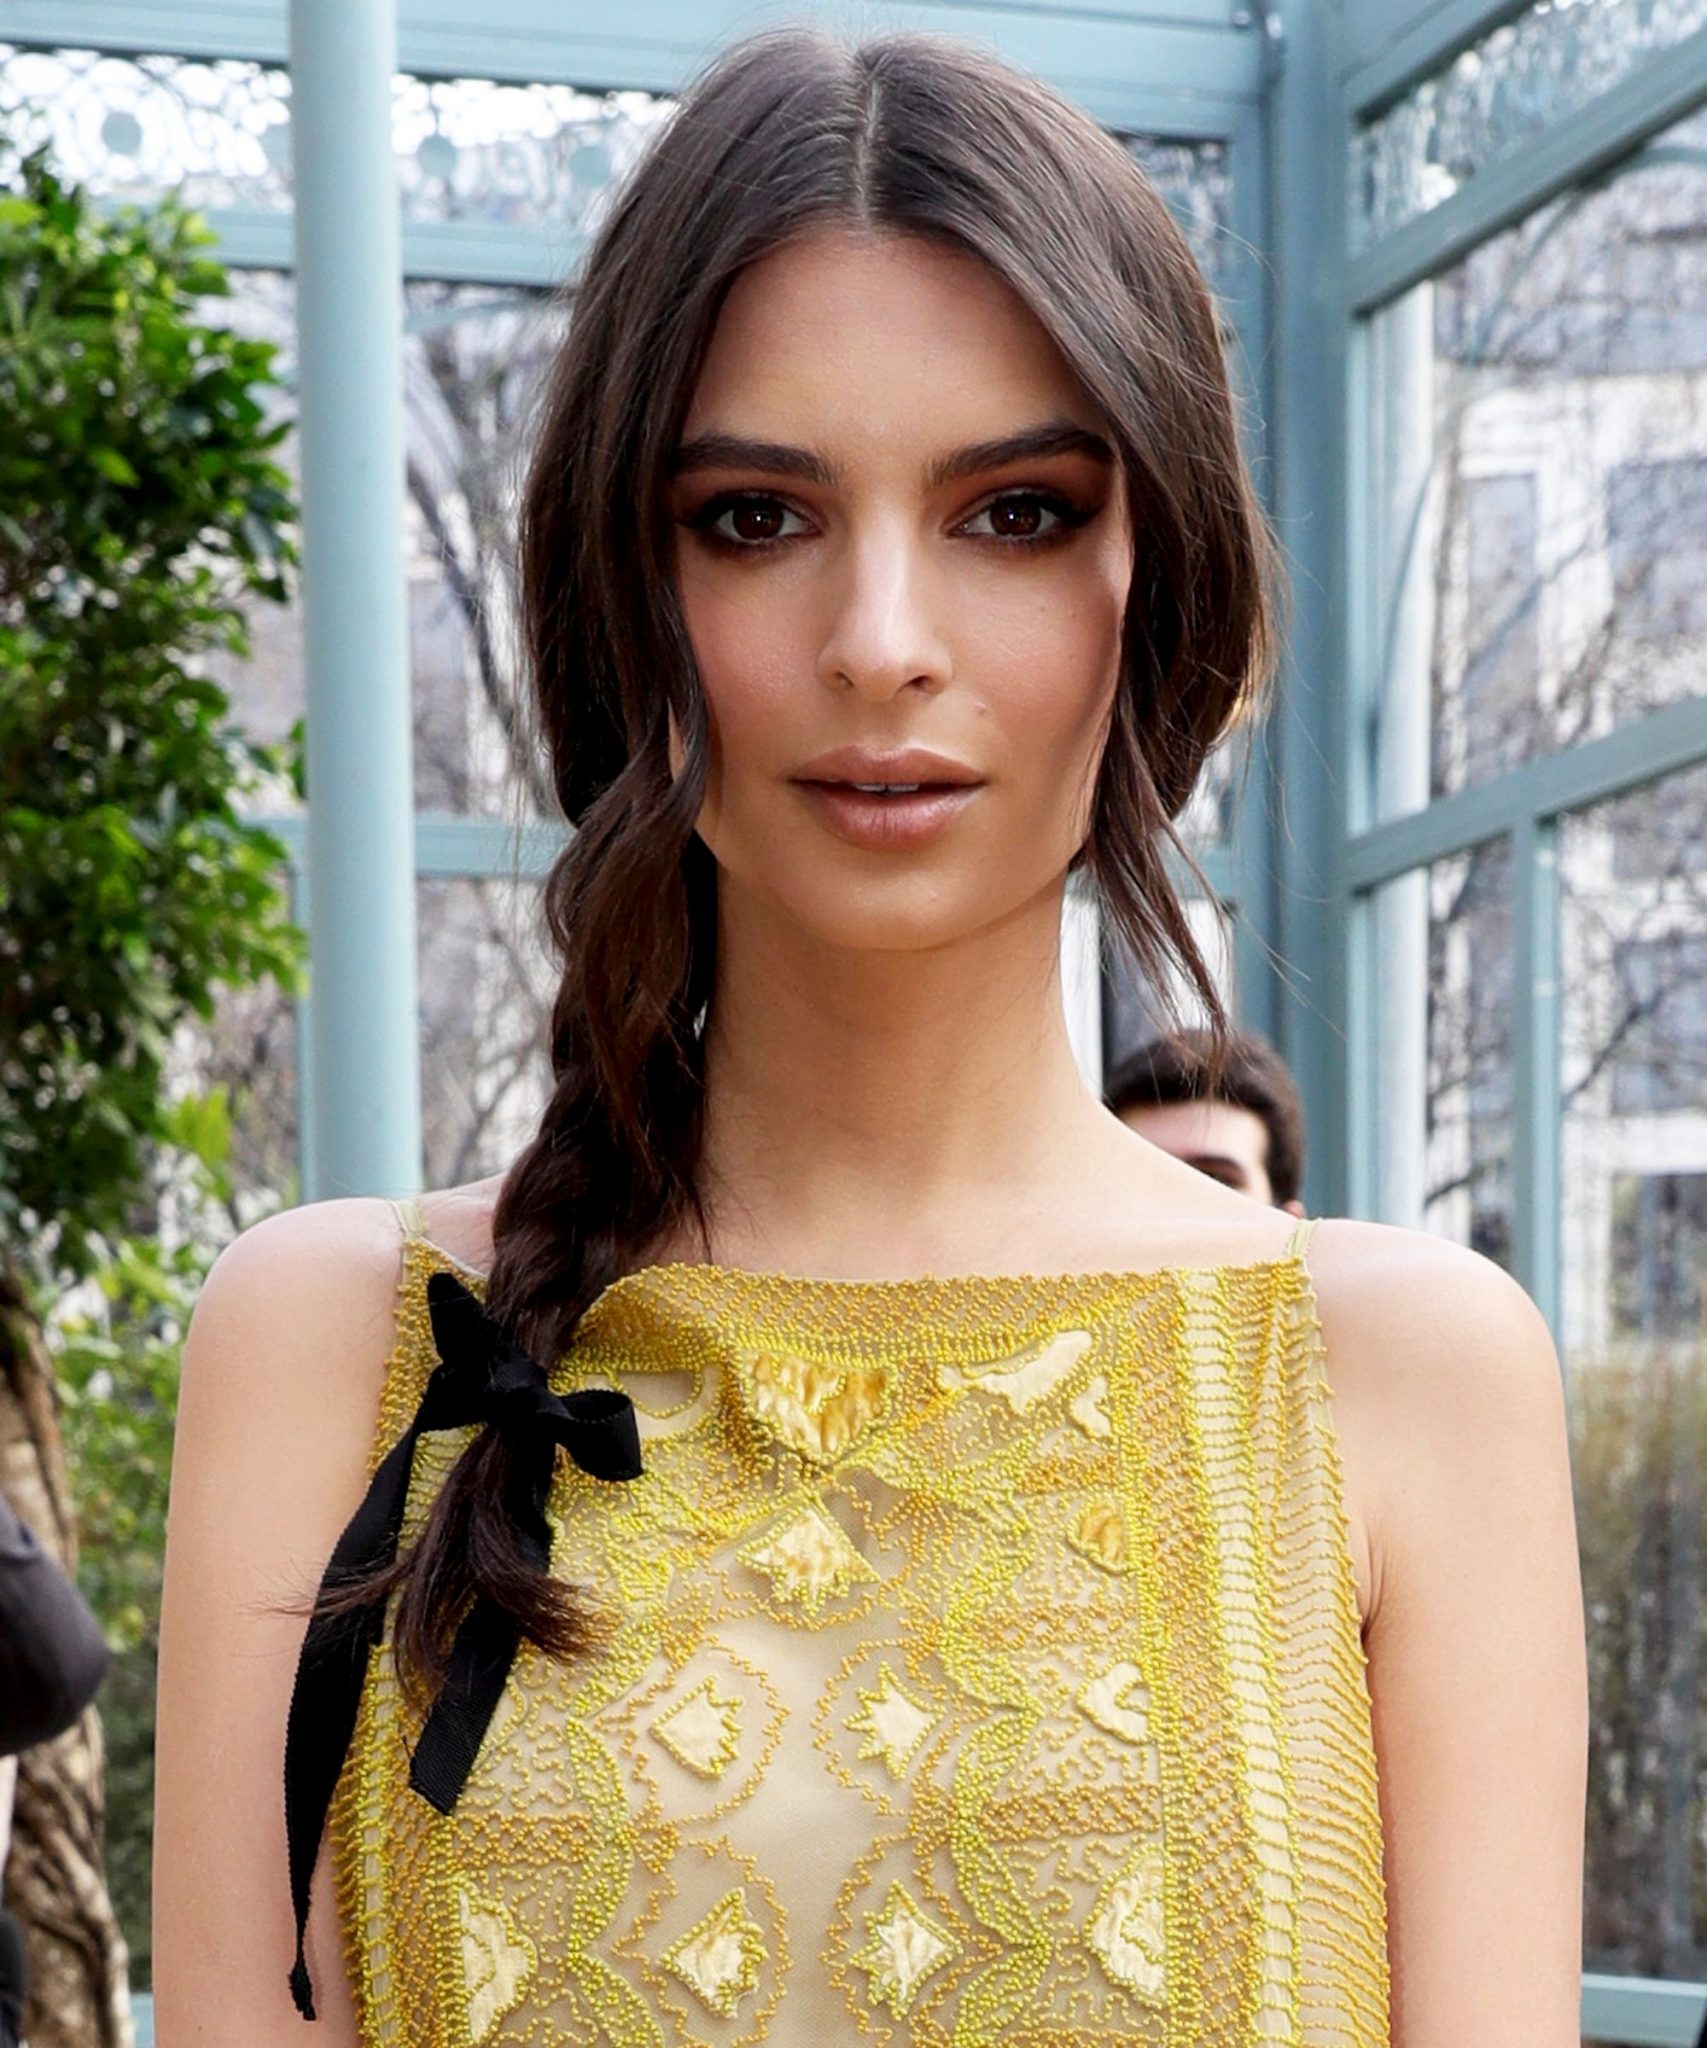 hair bows are back & hollywood can’t get enough of the trend